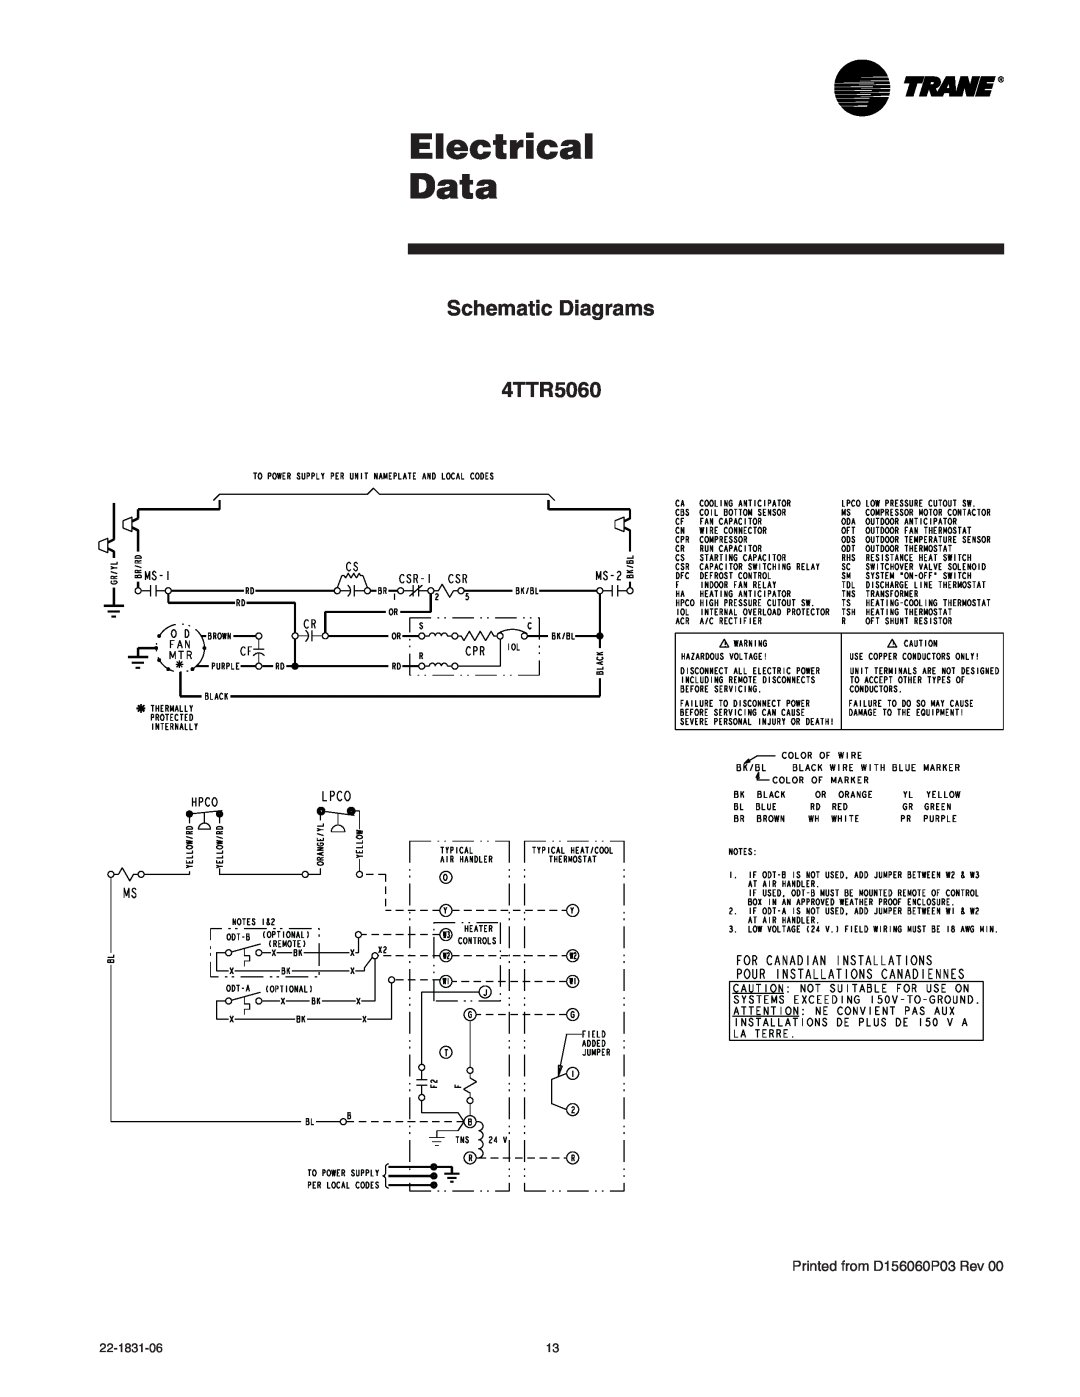 Trane XR15 manual Electrical Data, Schematic Diagrams 4TTR5060, Printed from D156060P03 Rev 